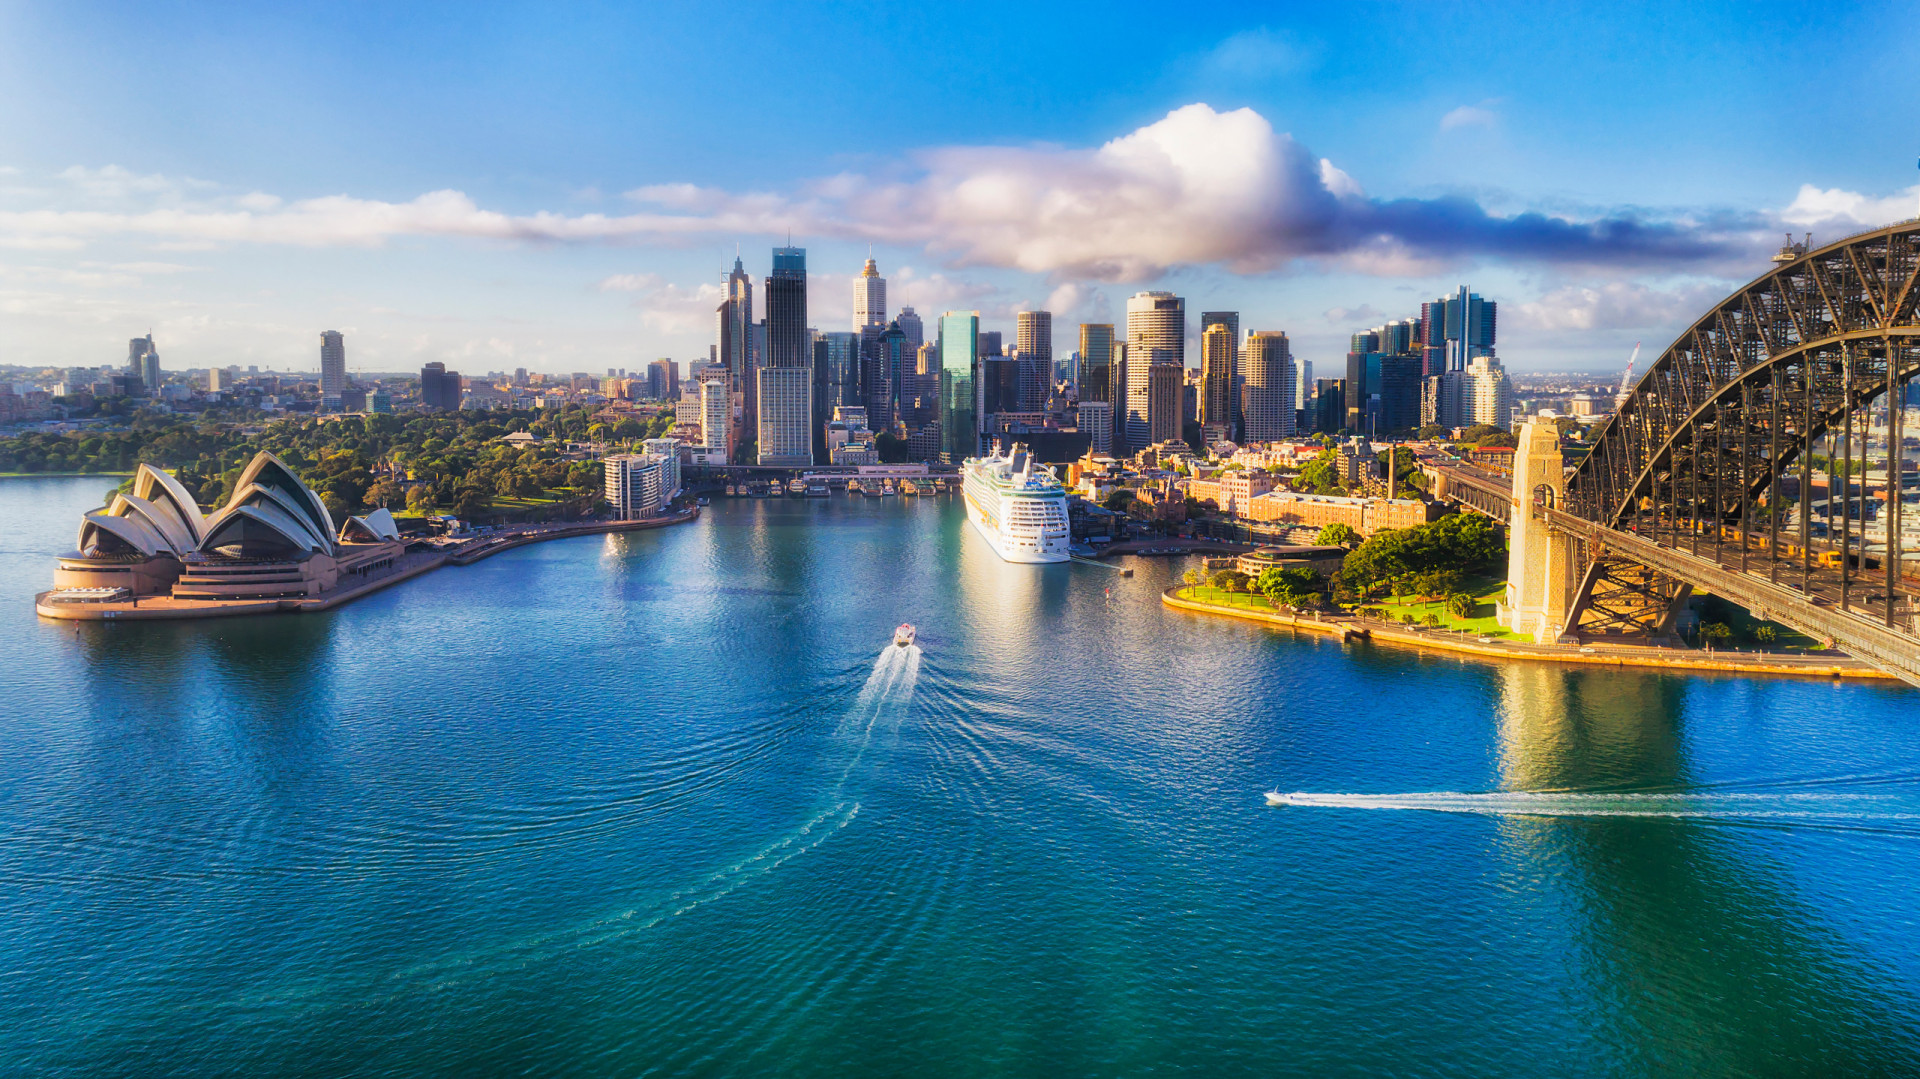 <p>Sydney's rent index of 56.2 reflects its status as Australia's bustling economic powerhouse. Known for its stunning harbor and vibrant lifestyle, living here comes with a high price tag.</p><p>You may also like:<a href="https://www.starsinsider.com/n/119323?utm_source=msn.com&utm_medium=display&utm_campaign=referral_description&utm_content=651794en-in"> Meet the humans who look like dolls</a></p>